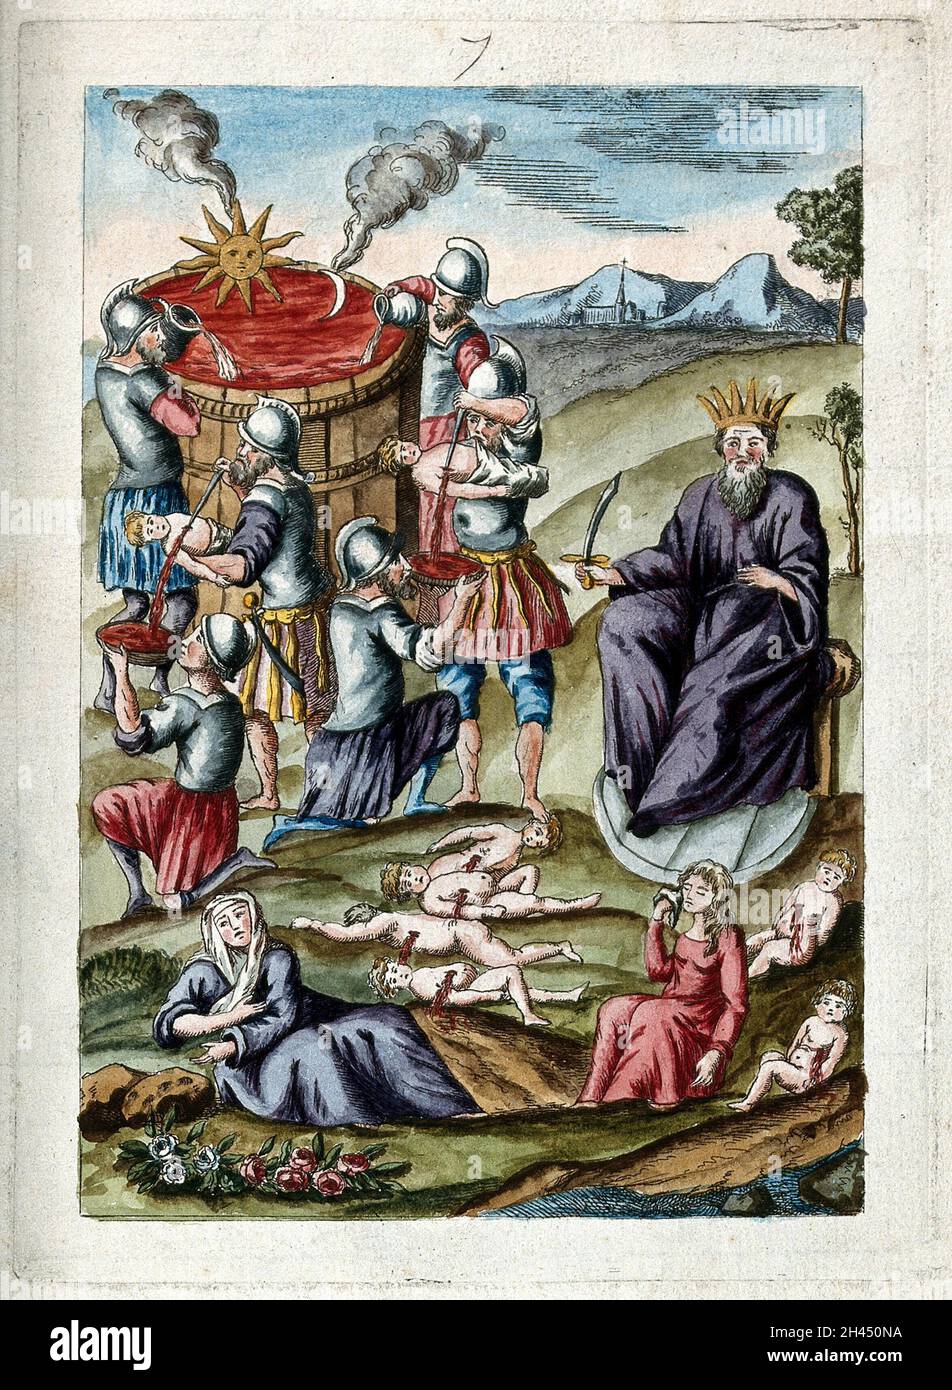 A king presiding over a massacre of infants; soldiers pour the blood of the infants into a boiling vat; probably representing the stage of 'putrefaction' in the alchemical process. Coloured etching after etching, ca. 17th century. Stock Photo